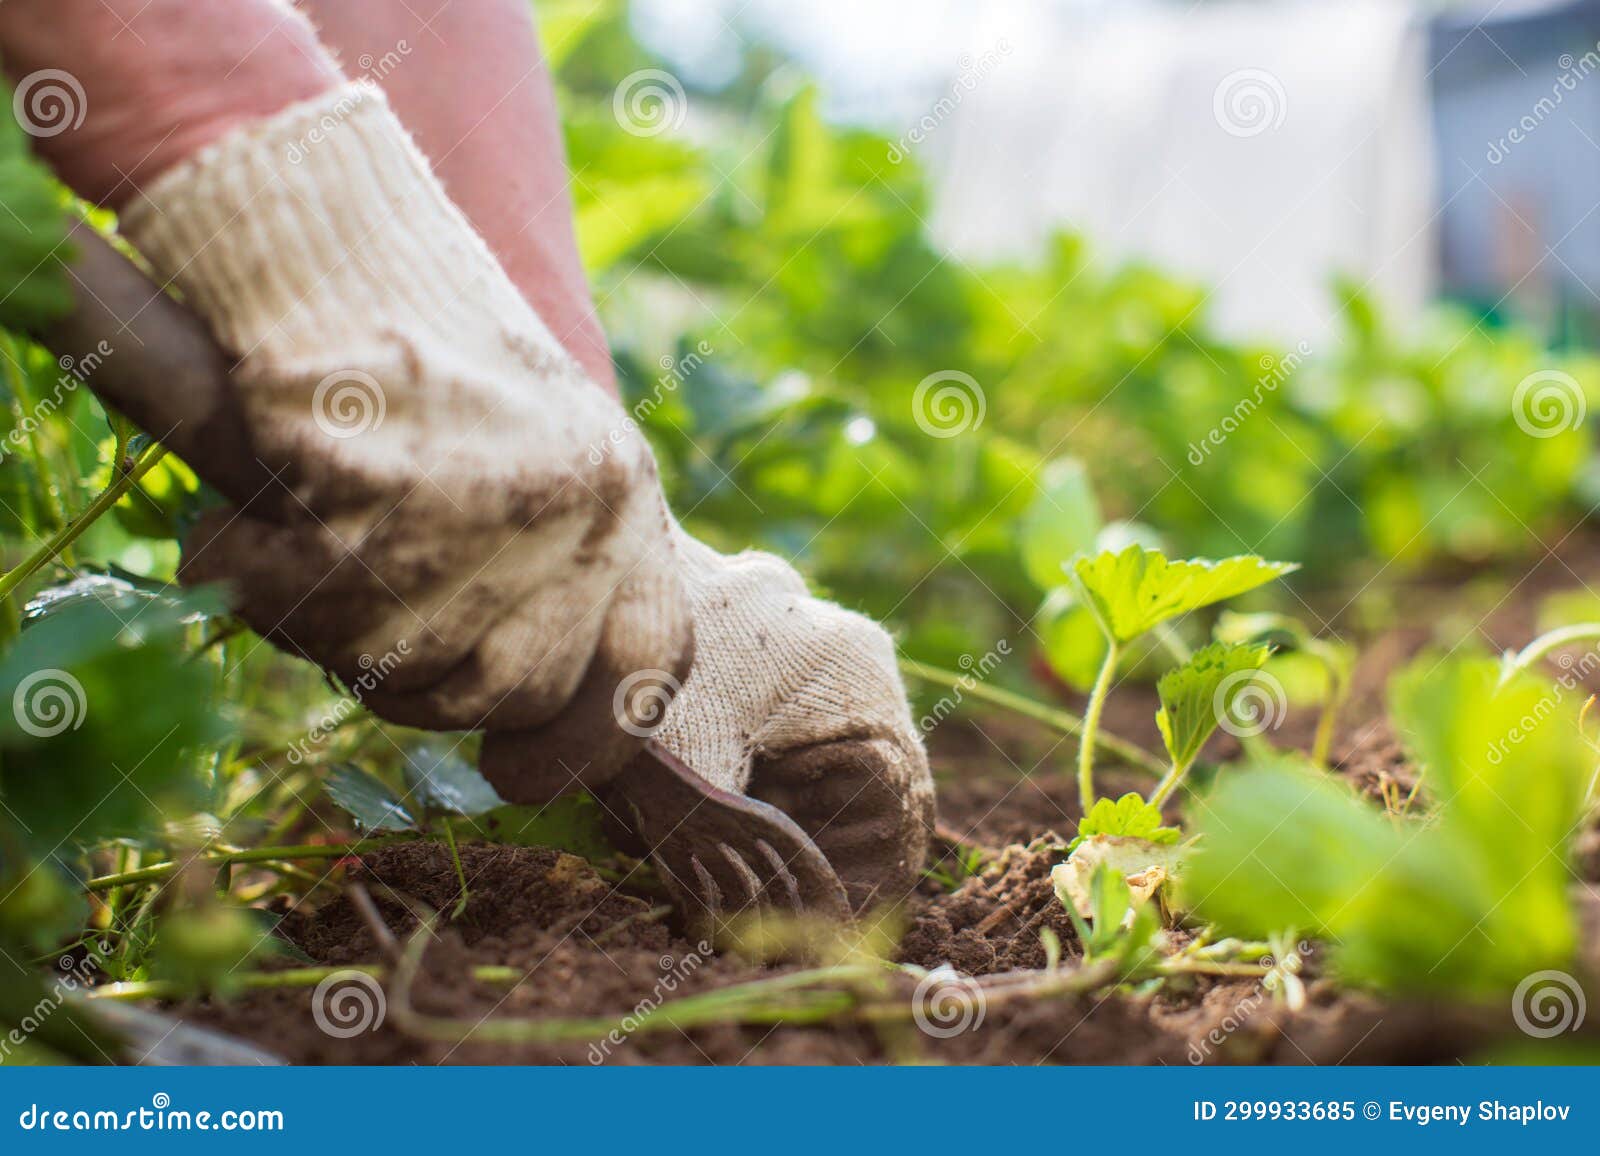 weeding beds with agricultura plants growing in the garden. weed control in the garden. cultivated land close-up